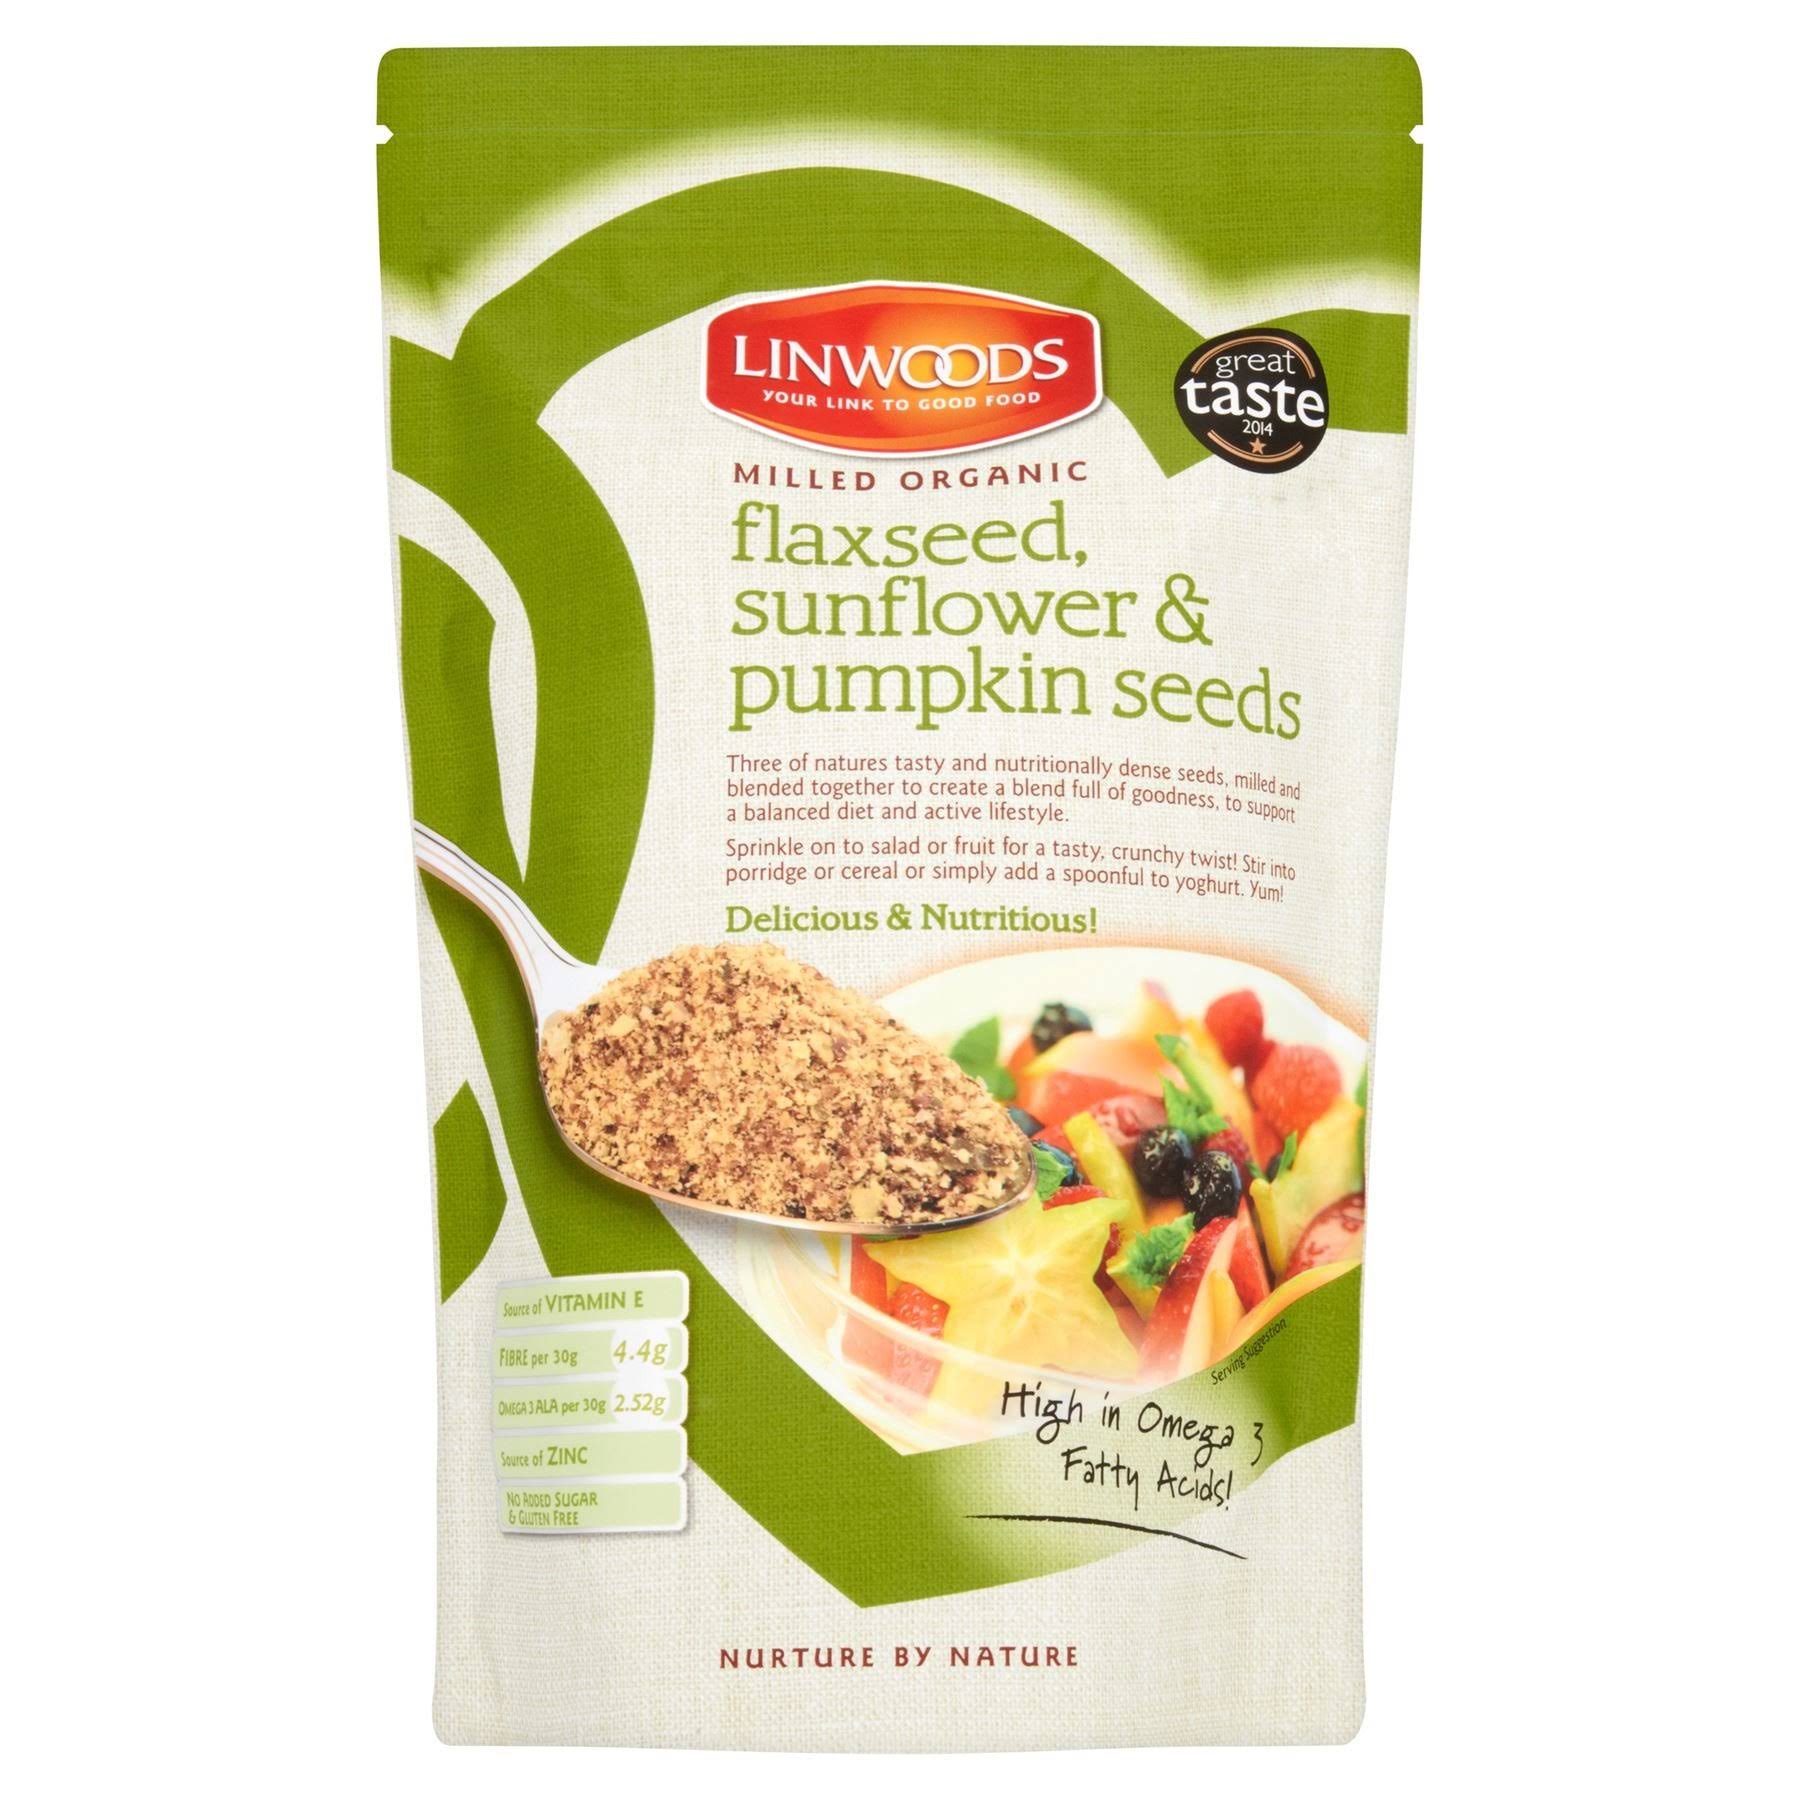 Linwoods Milled Organic Flaxseed Sunflower and Pumpkin Seeds - 425g